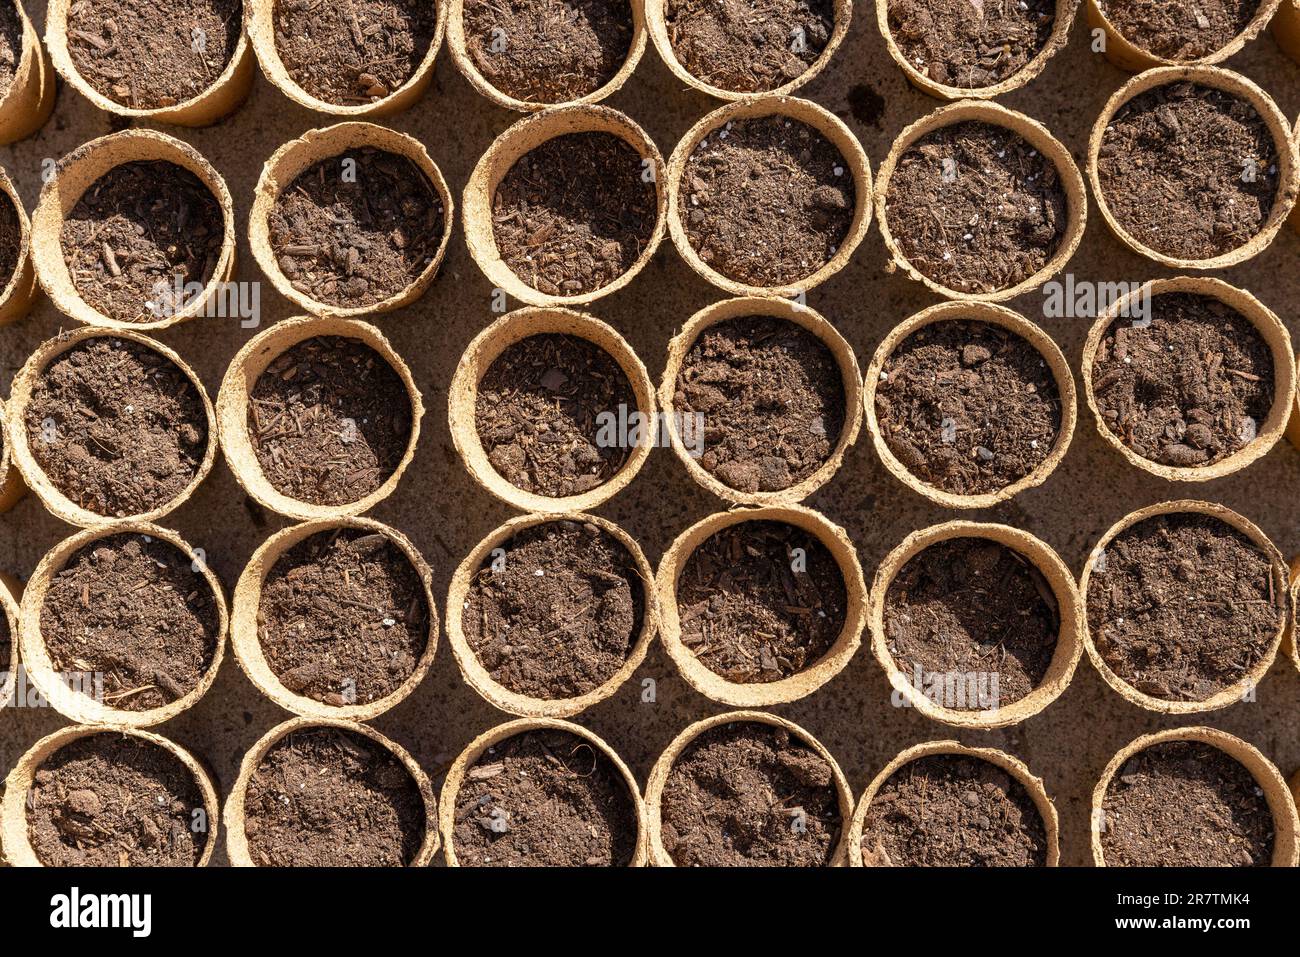 Rows of seeds and soil in small peat pots ready for planting Stock Photo